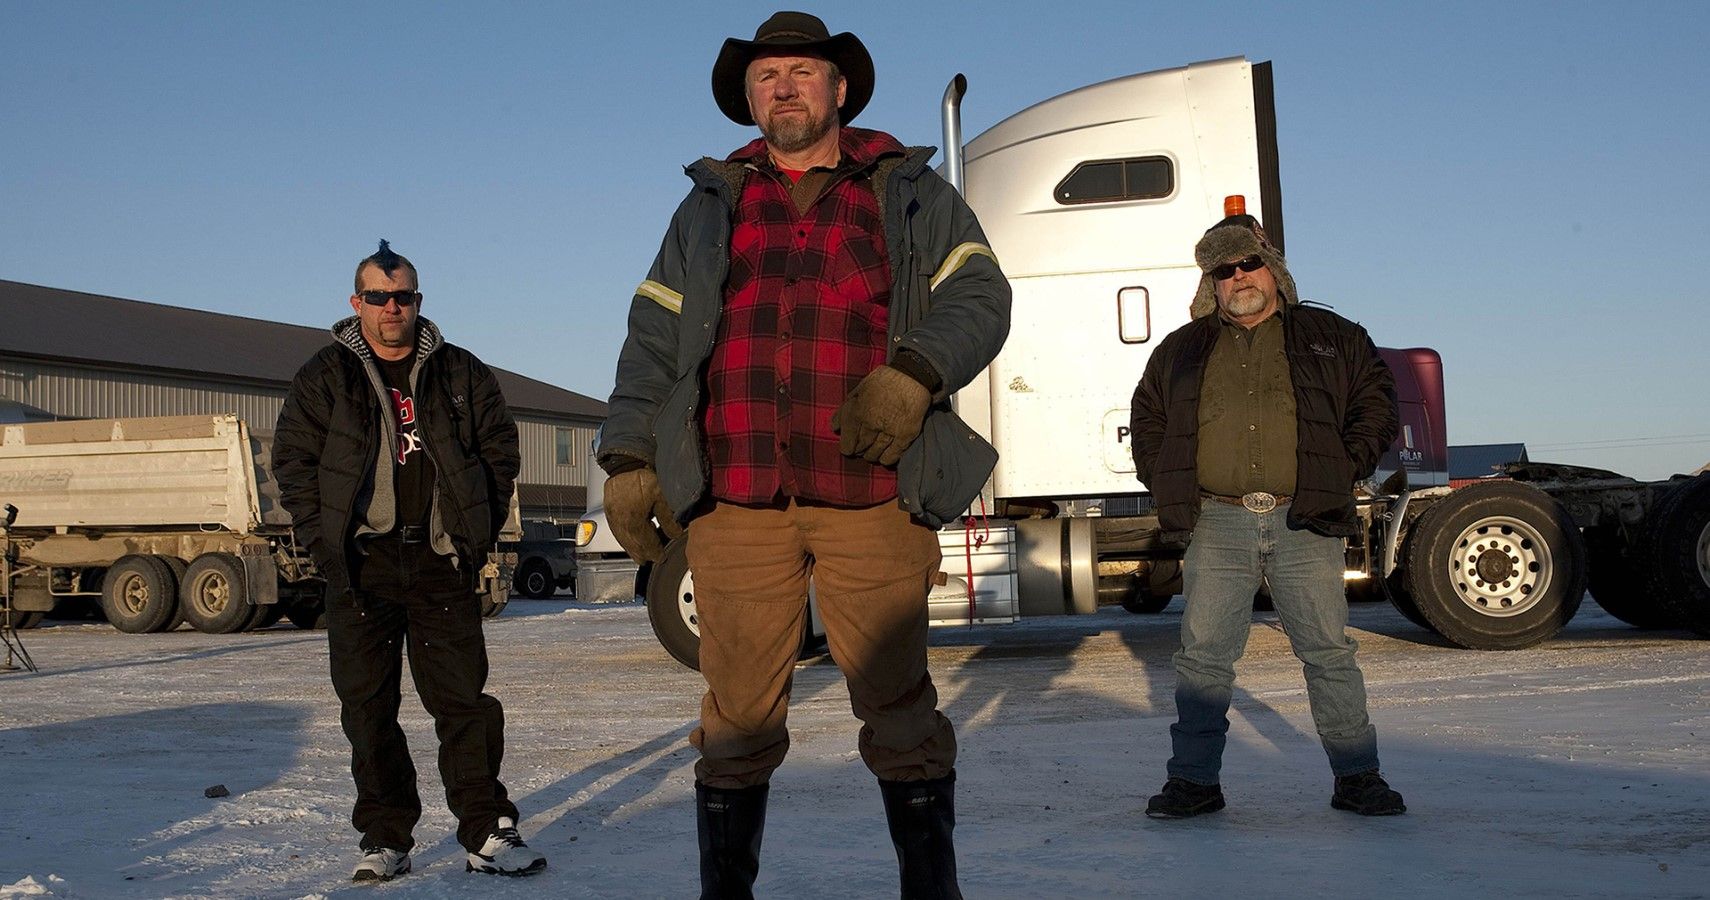 Why was ice road truckers cancelled? How to watch Series 11!